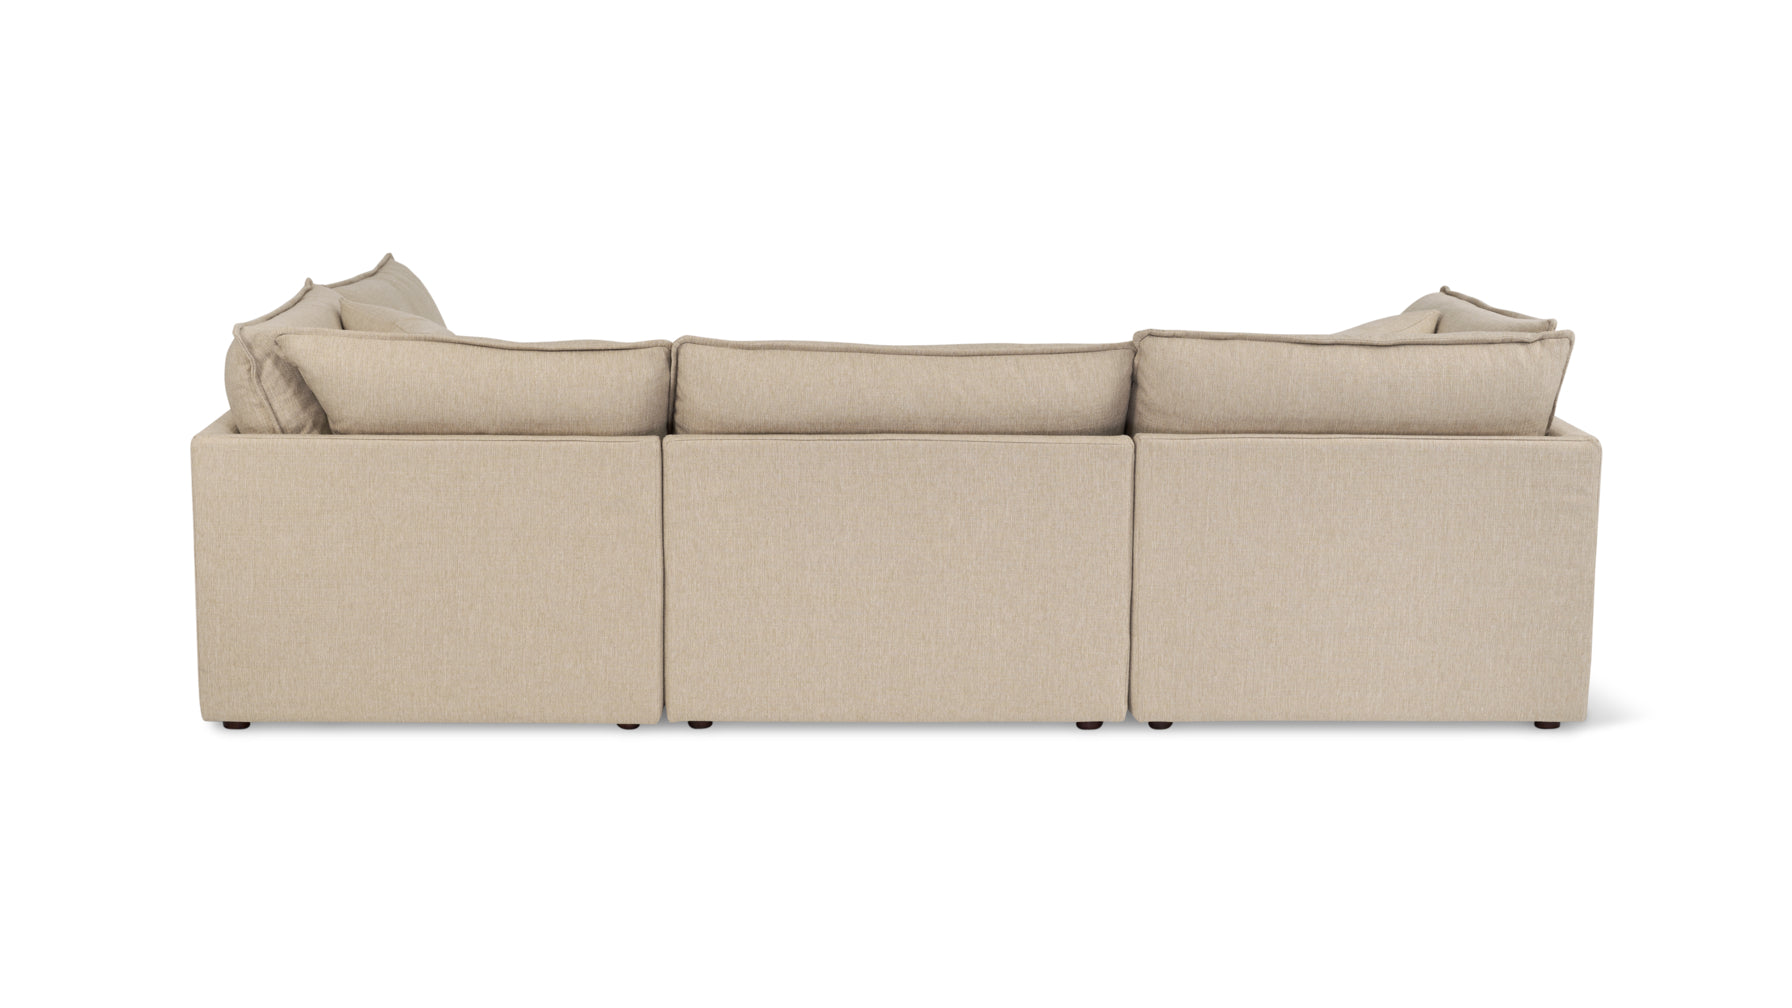 Chill Time 5-Piece Modular Sectional, Biscuit - Image 4